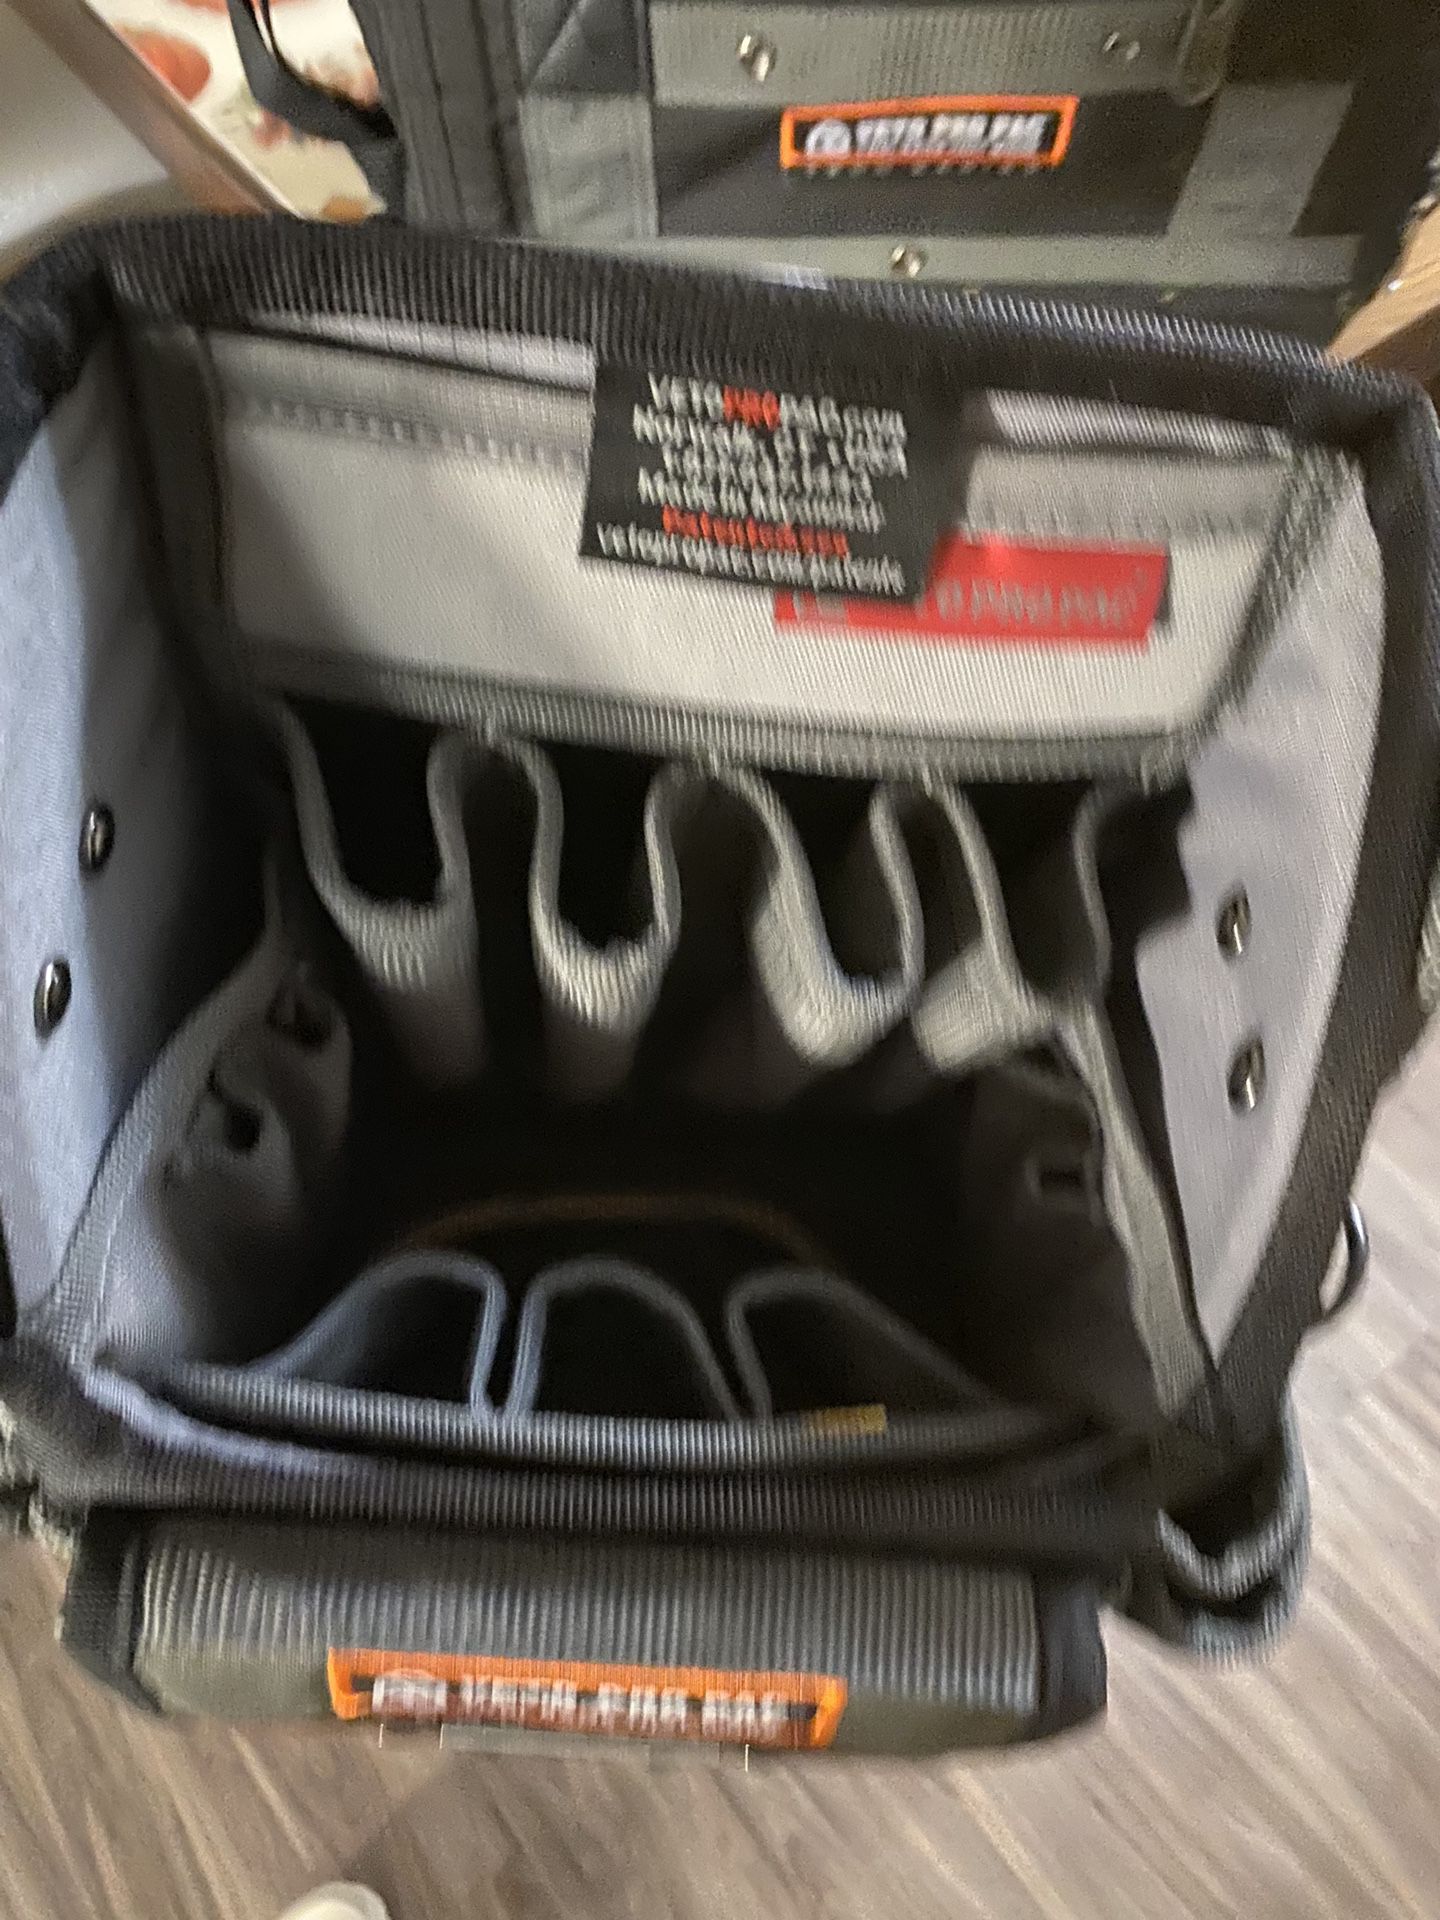 Veto Pro PAC Tp6b for Sale in Fontana, CA - OfferUp